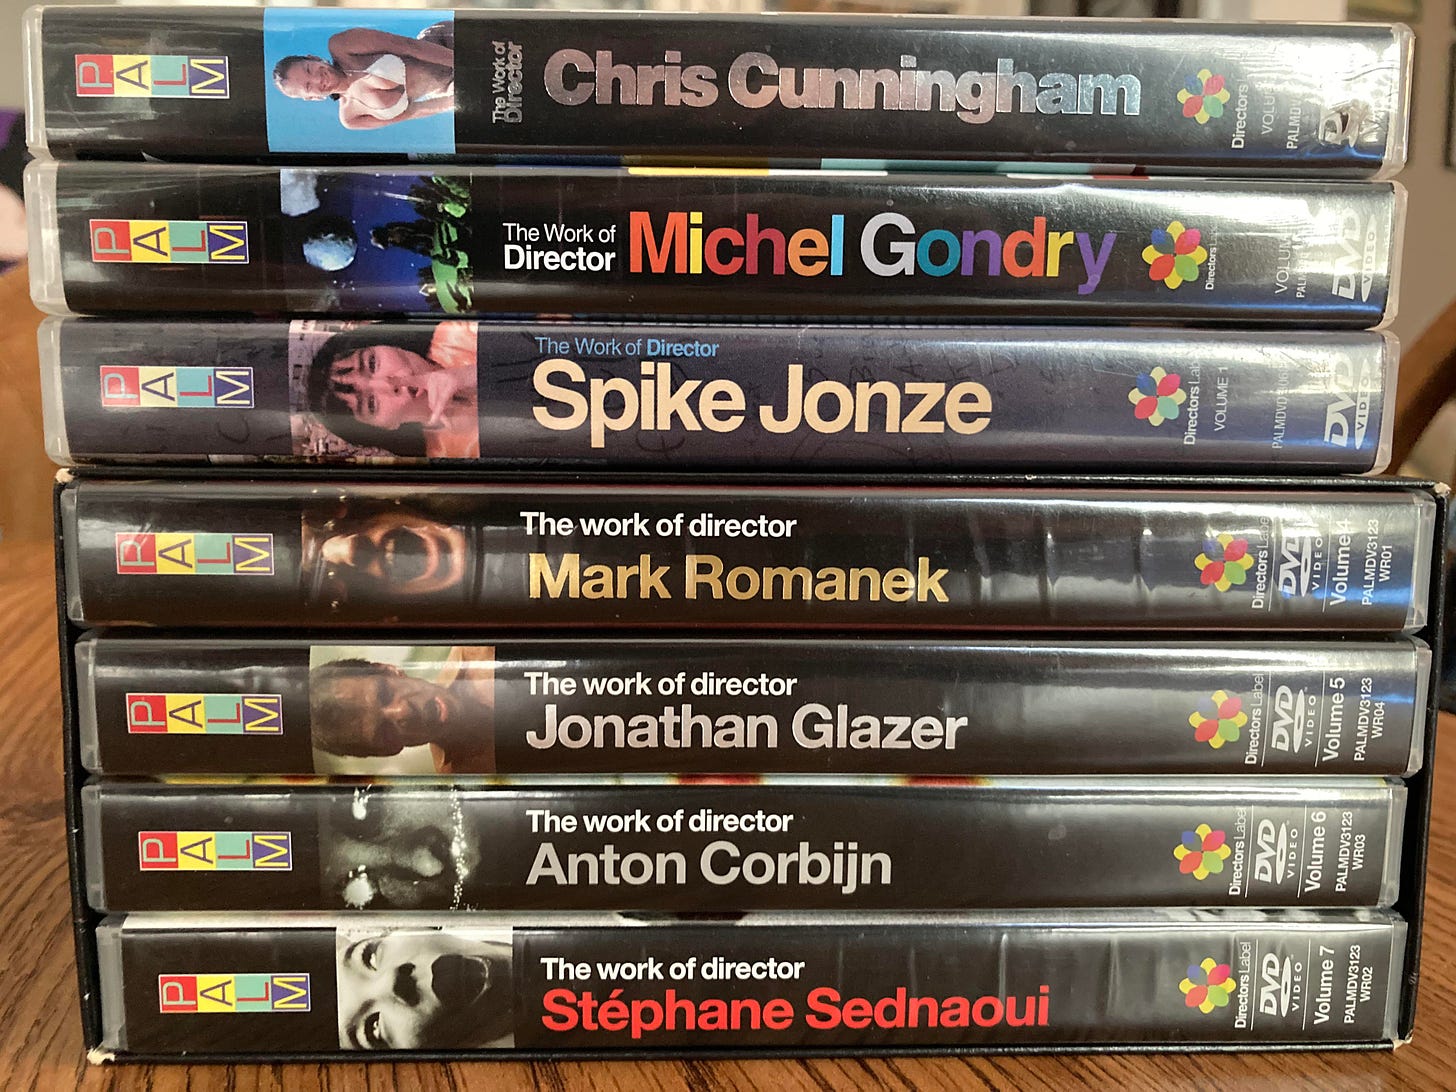 My Palm Directors Label collection. Teenage me dreamed of owning all these.  Jonathan Glazer is my favorite director of the lot but Spike Jonze and  Michel Gondry's volumes are the best in